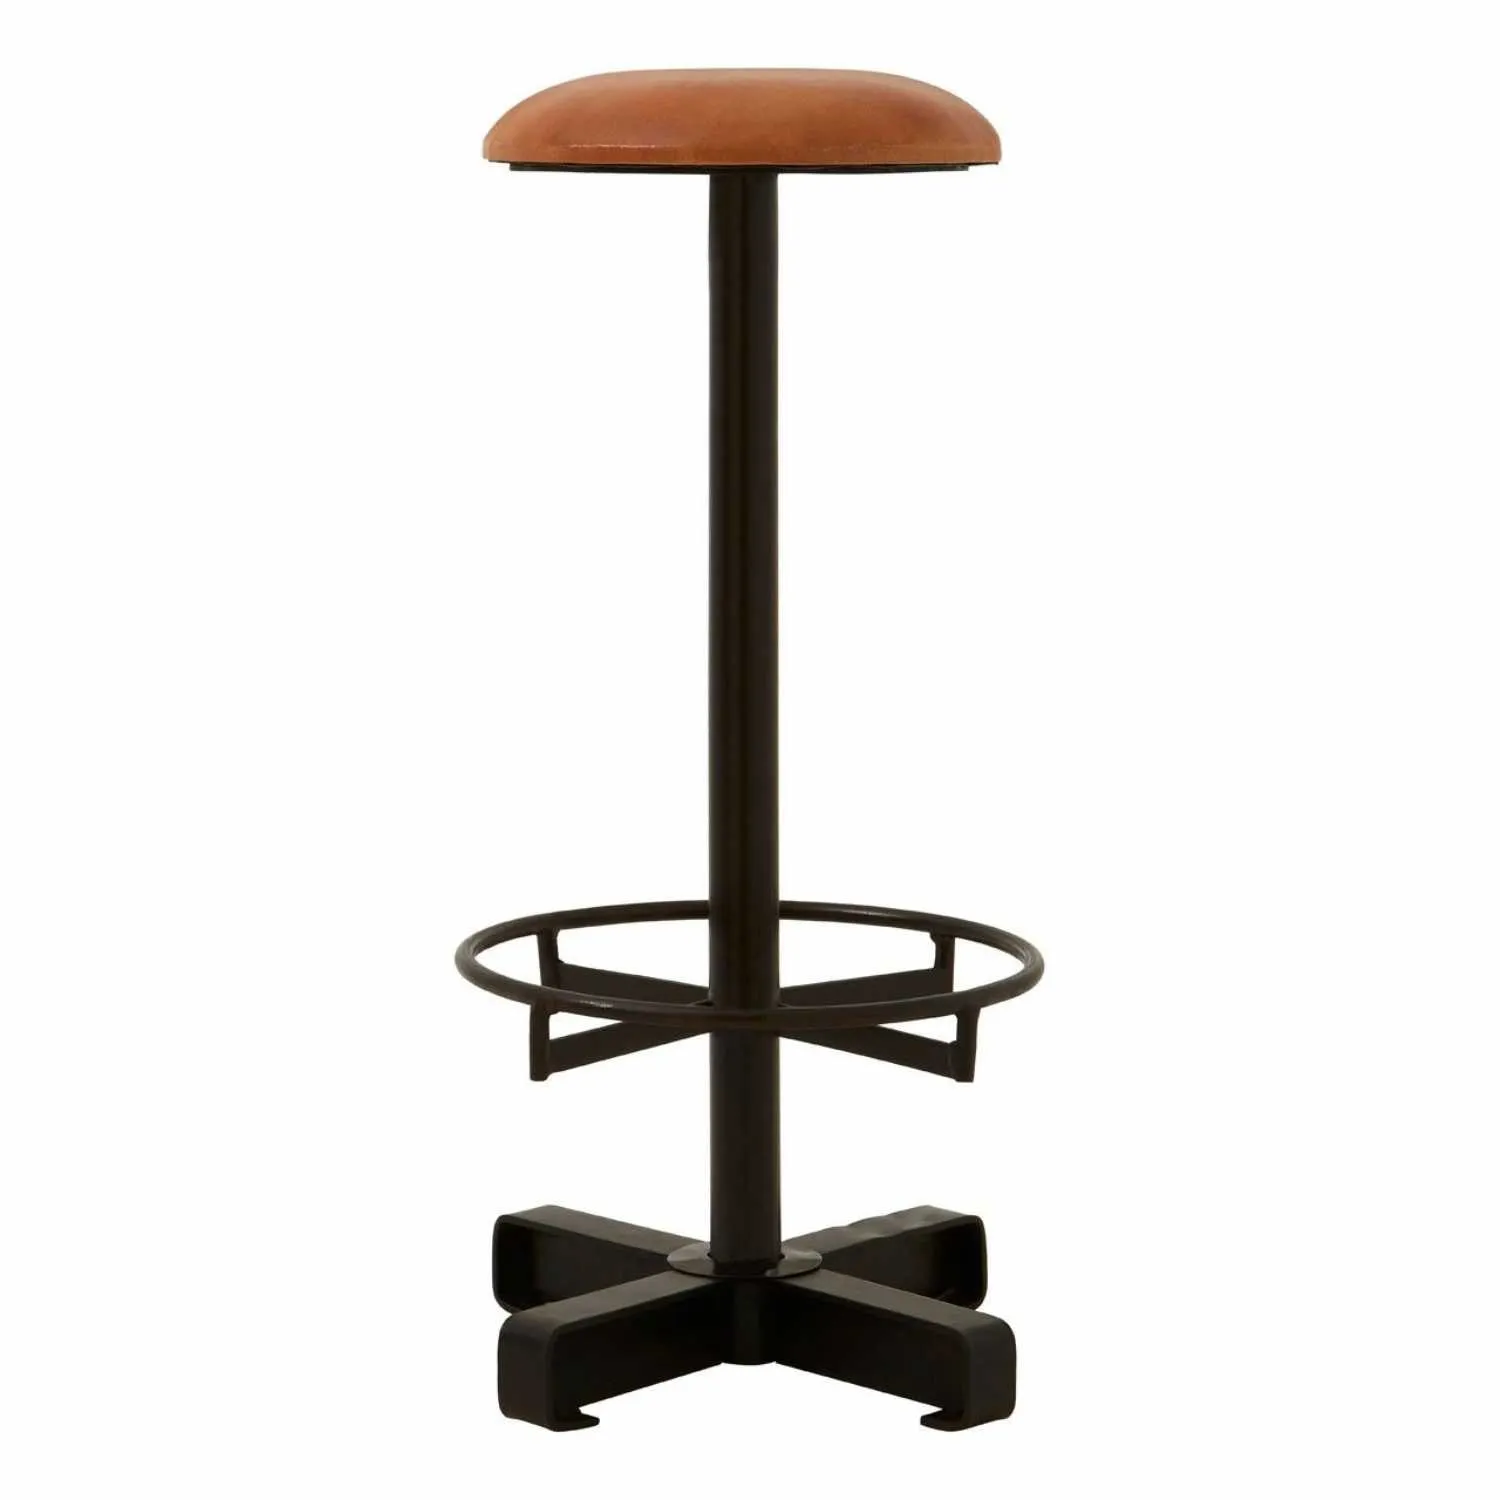 Light Brown Leather Bar Stool On Iron Stand Latticed Footrest